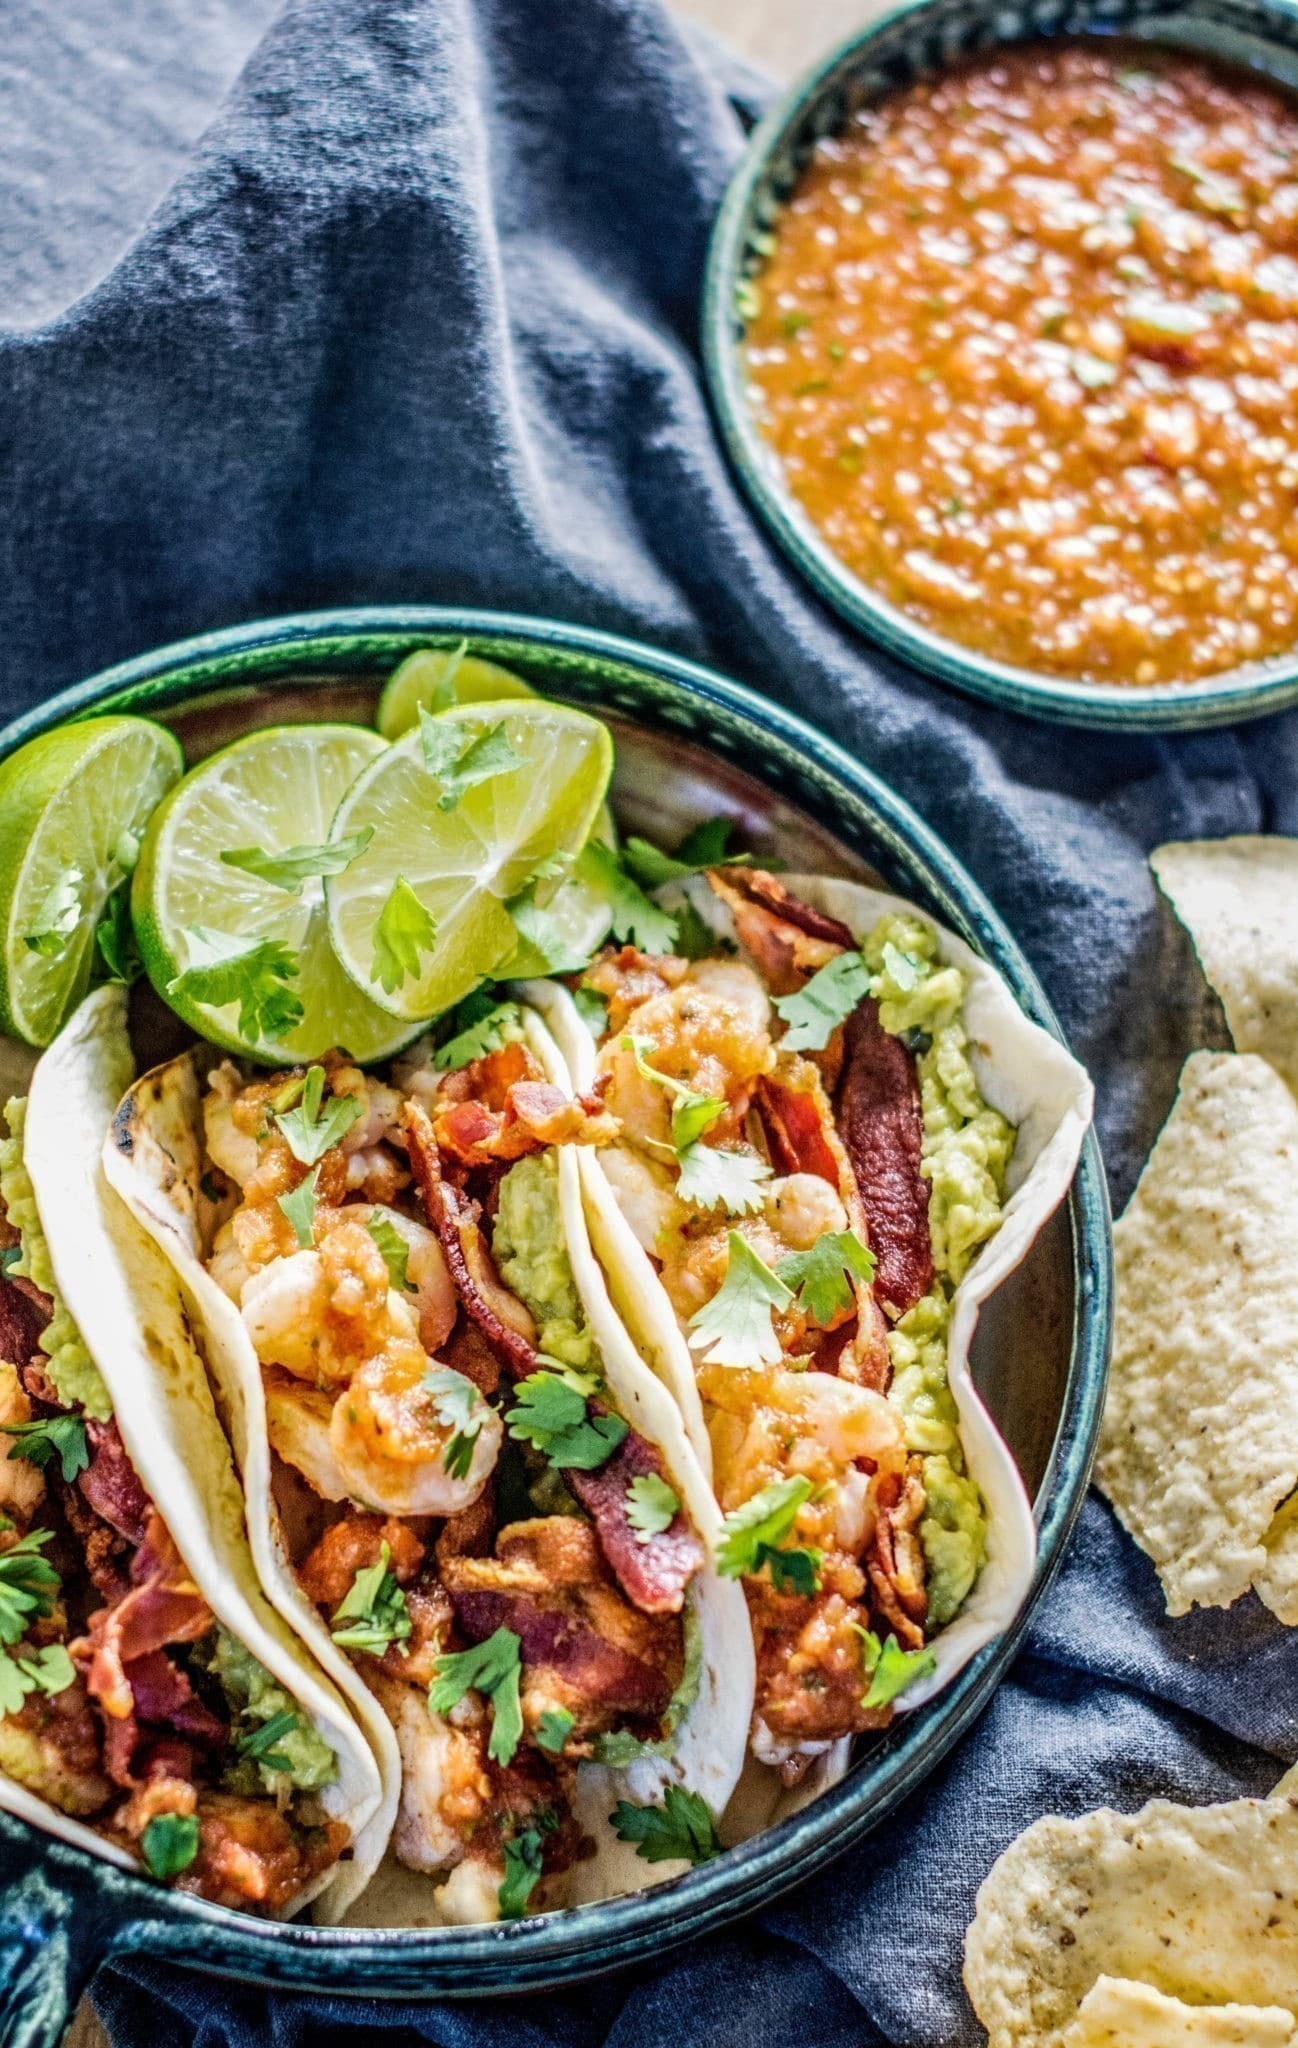 Make this amazing Tequila Shrimp Tacos and pile on the bacon and roasted chipotle salsa! Get the recipe at Little Figgy Food